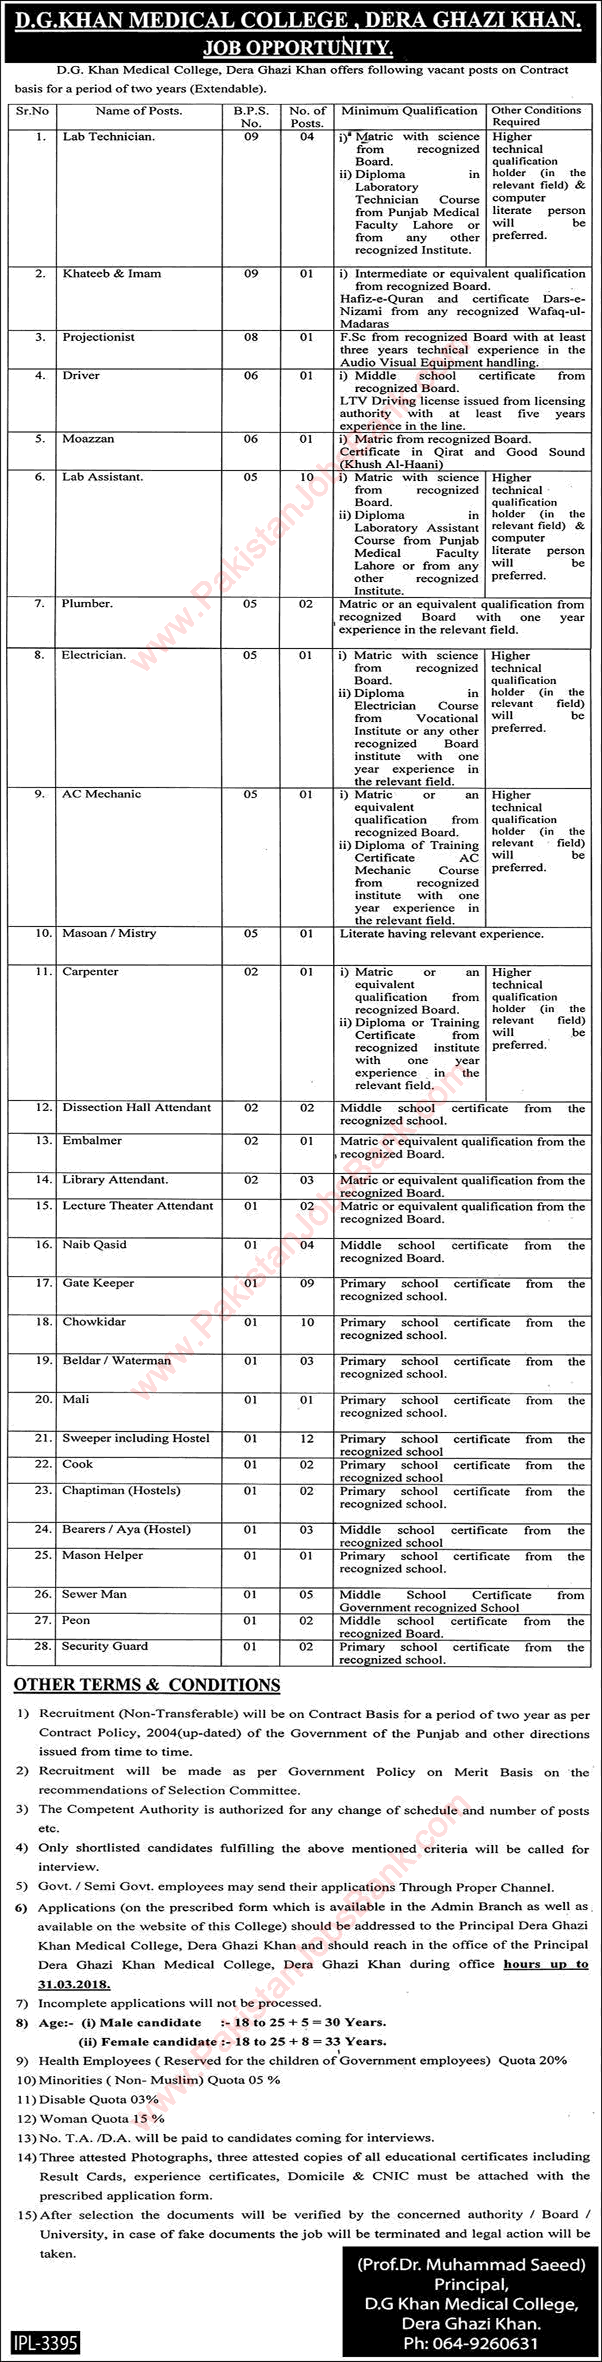 Dera Ghazi Khan Medical College Jobs 2018 March Lab Assistants, Chowkidar, Sweepers & Others Latest